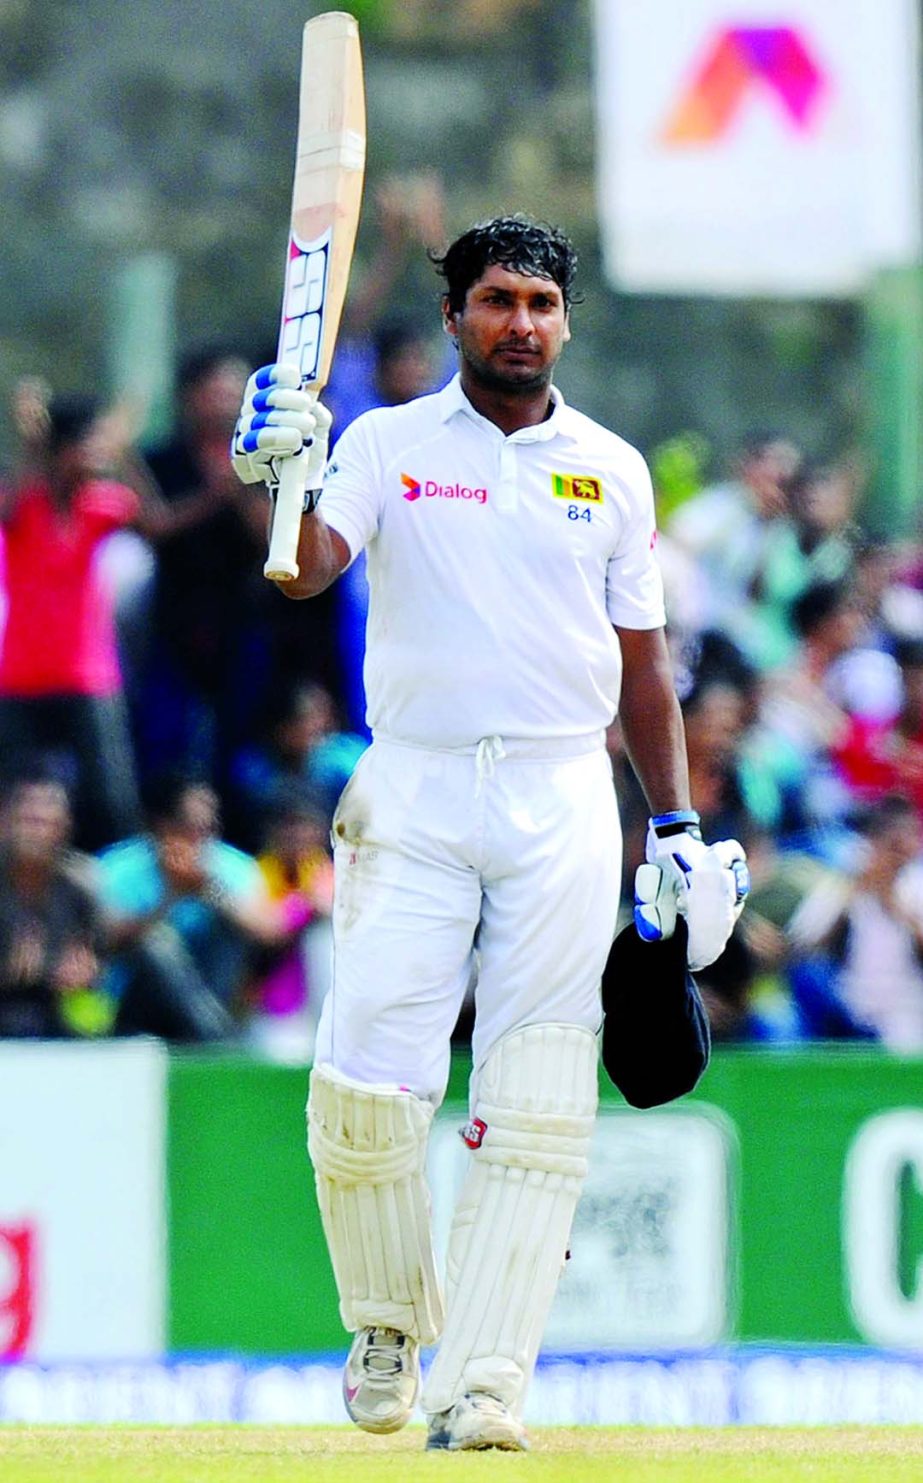 Kumar Sangakkara raised a 37th Test hundred on the 3rd day of 1st Test between Sri Lanka and Pakistan at Galle on Friday.